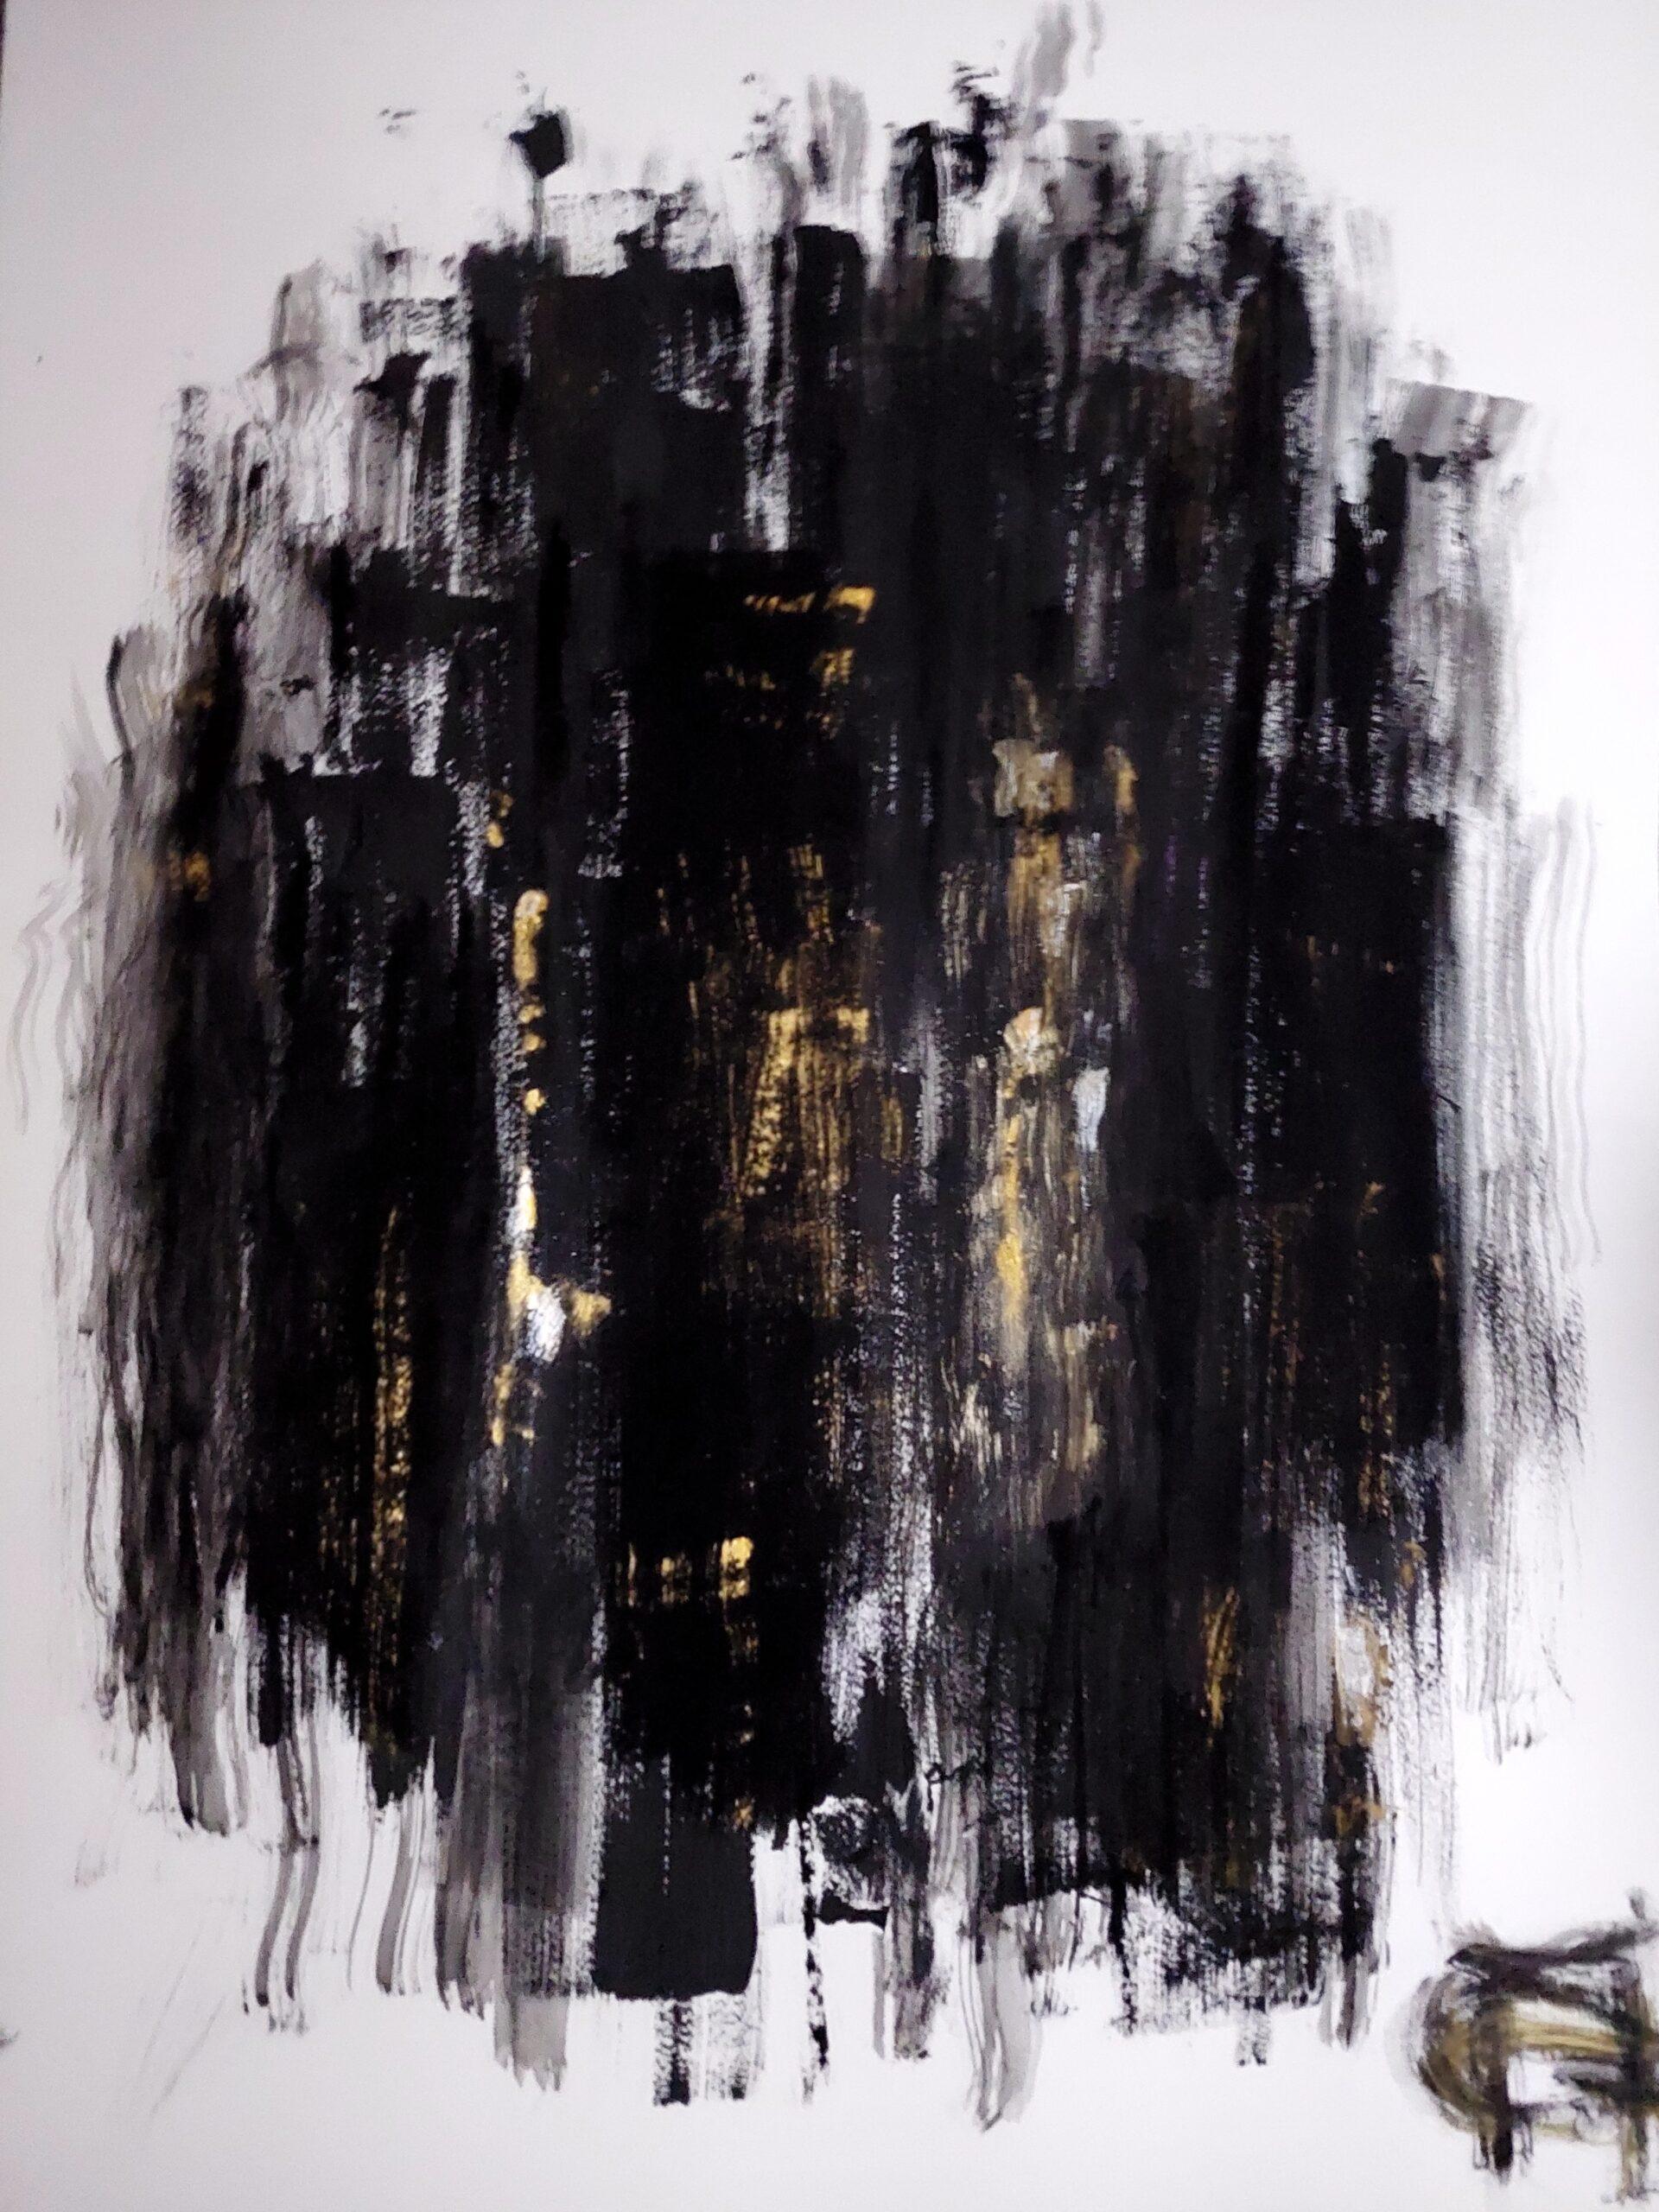 'BLACK CROWD' - Painting by Unknown